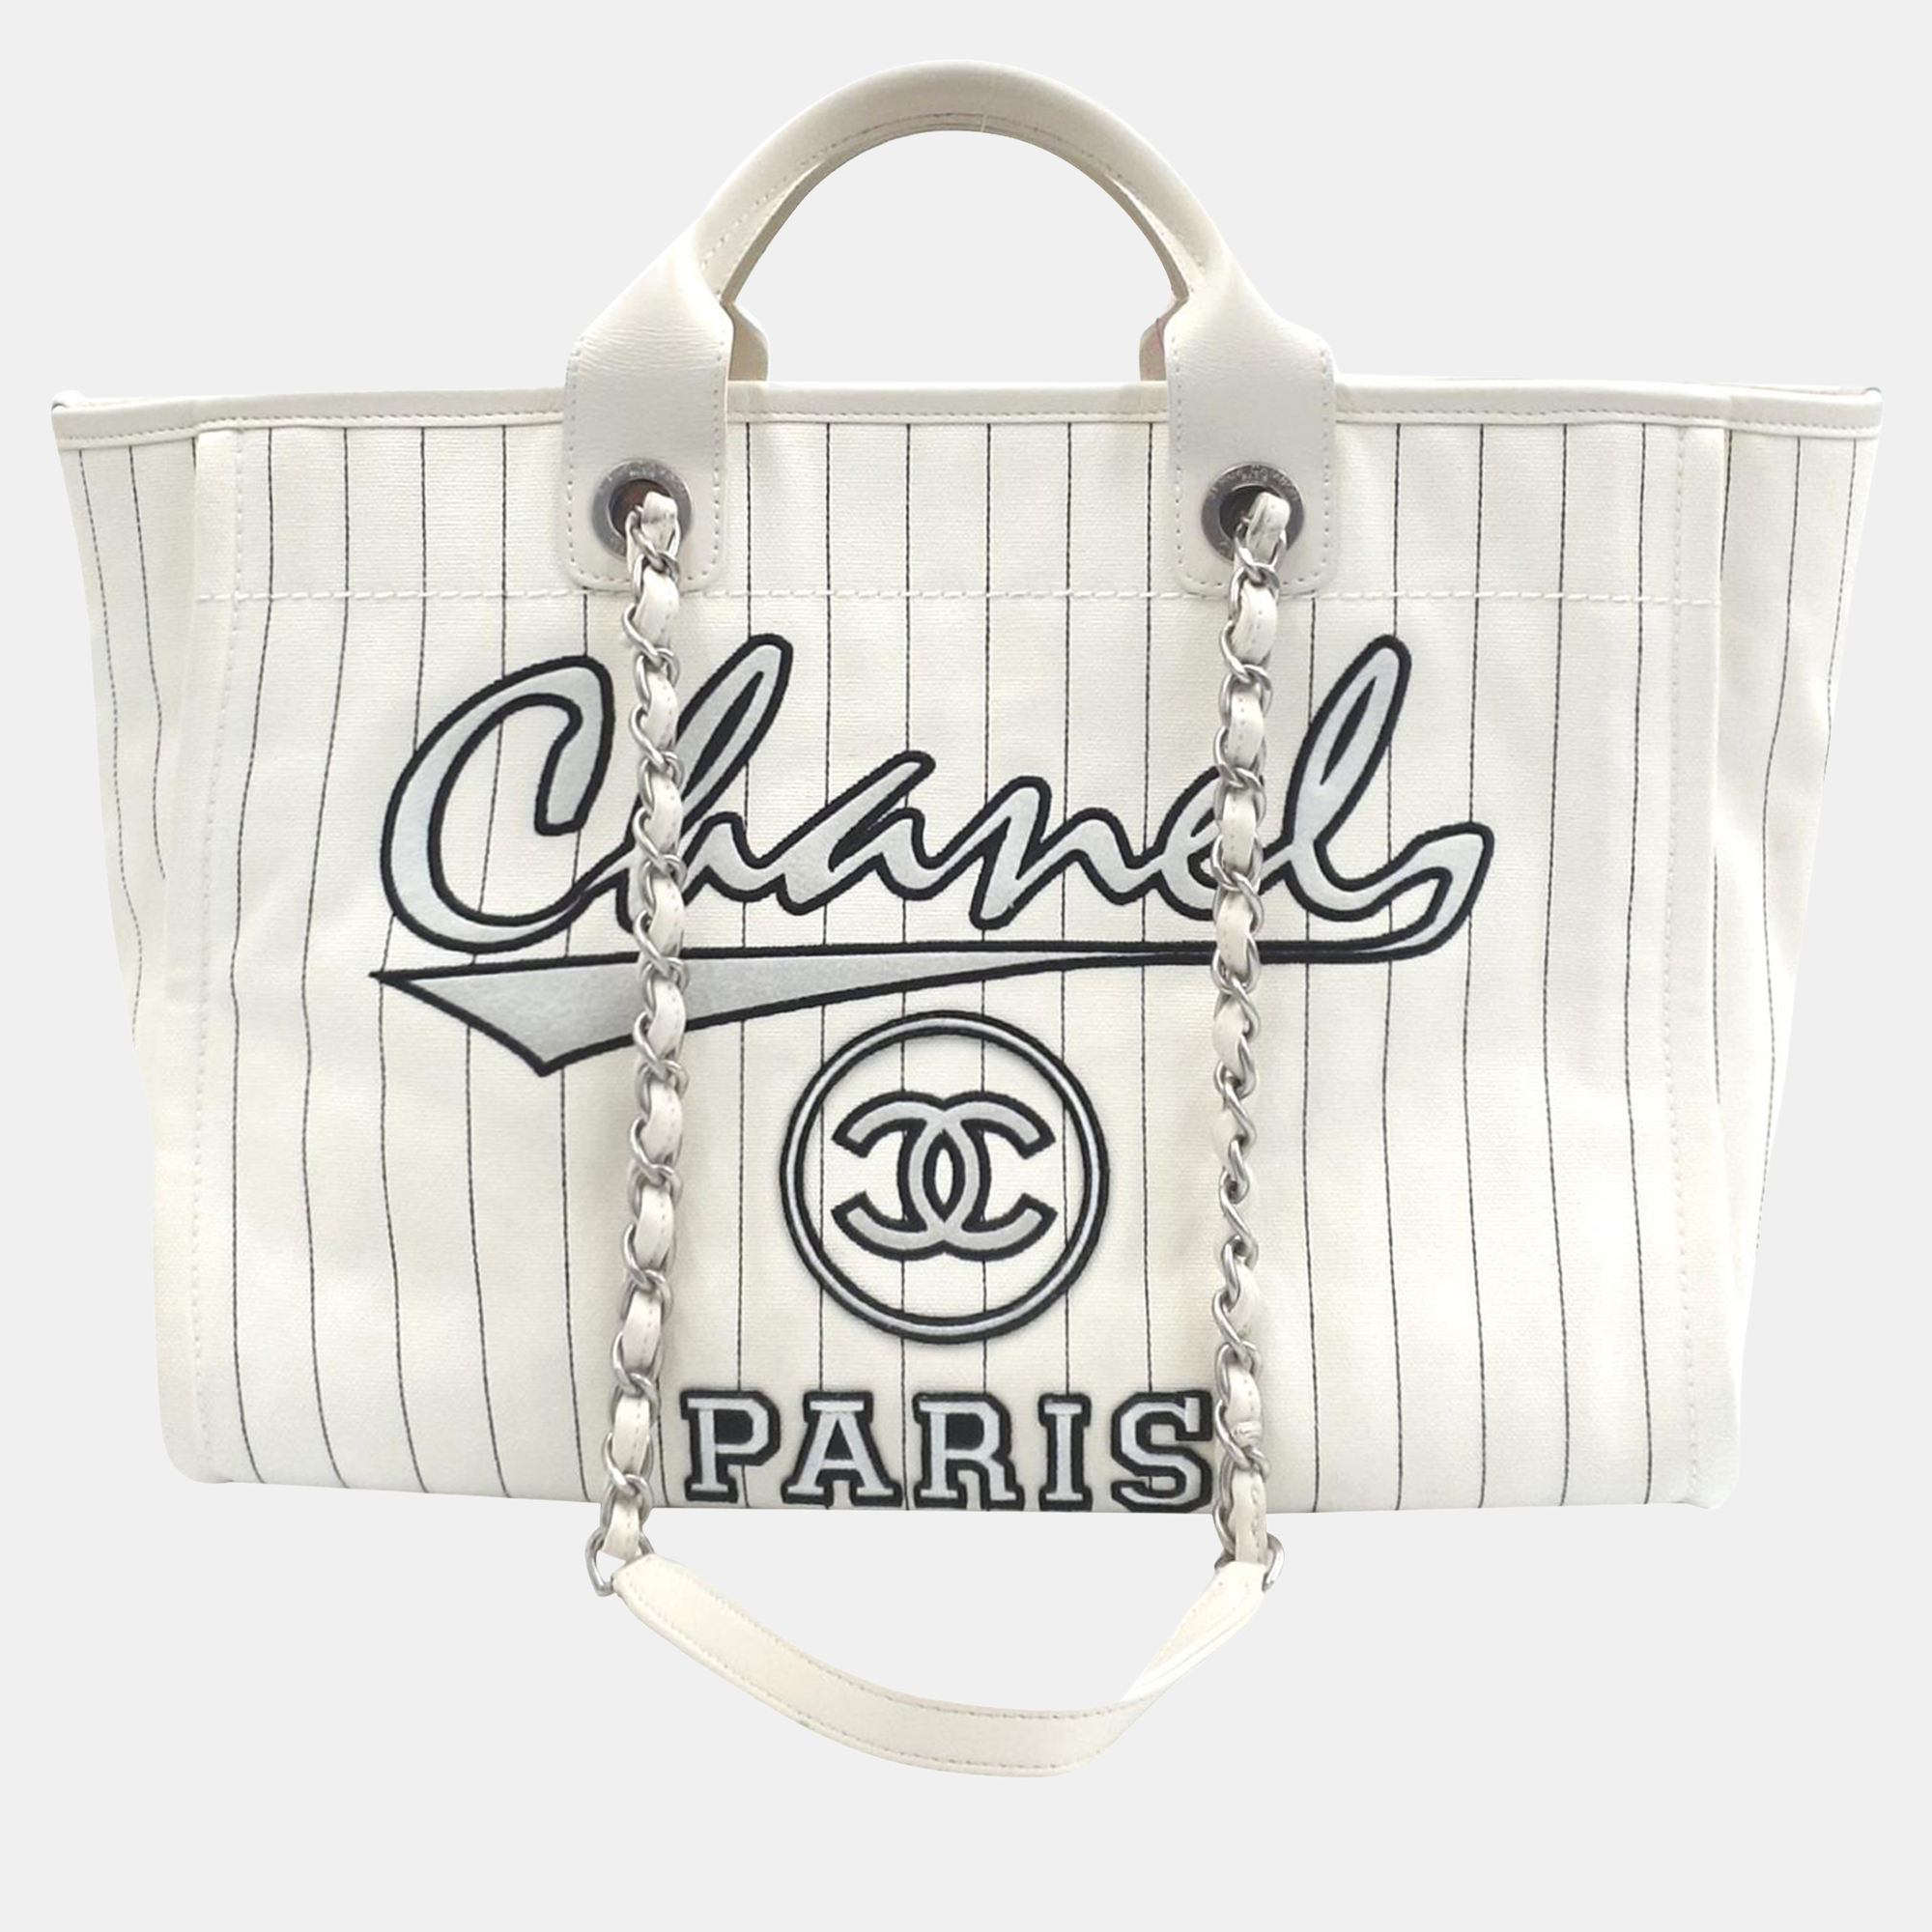 Elevate your every day with this Chanel tote. Meticulously designed it seamlessly blends functionality with luxury offering the perfect accessory to showcase your discerning style while effortlessly carrying your essentials.